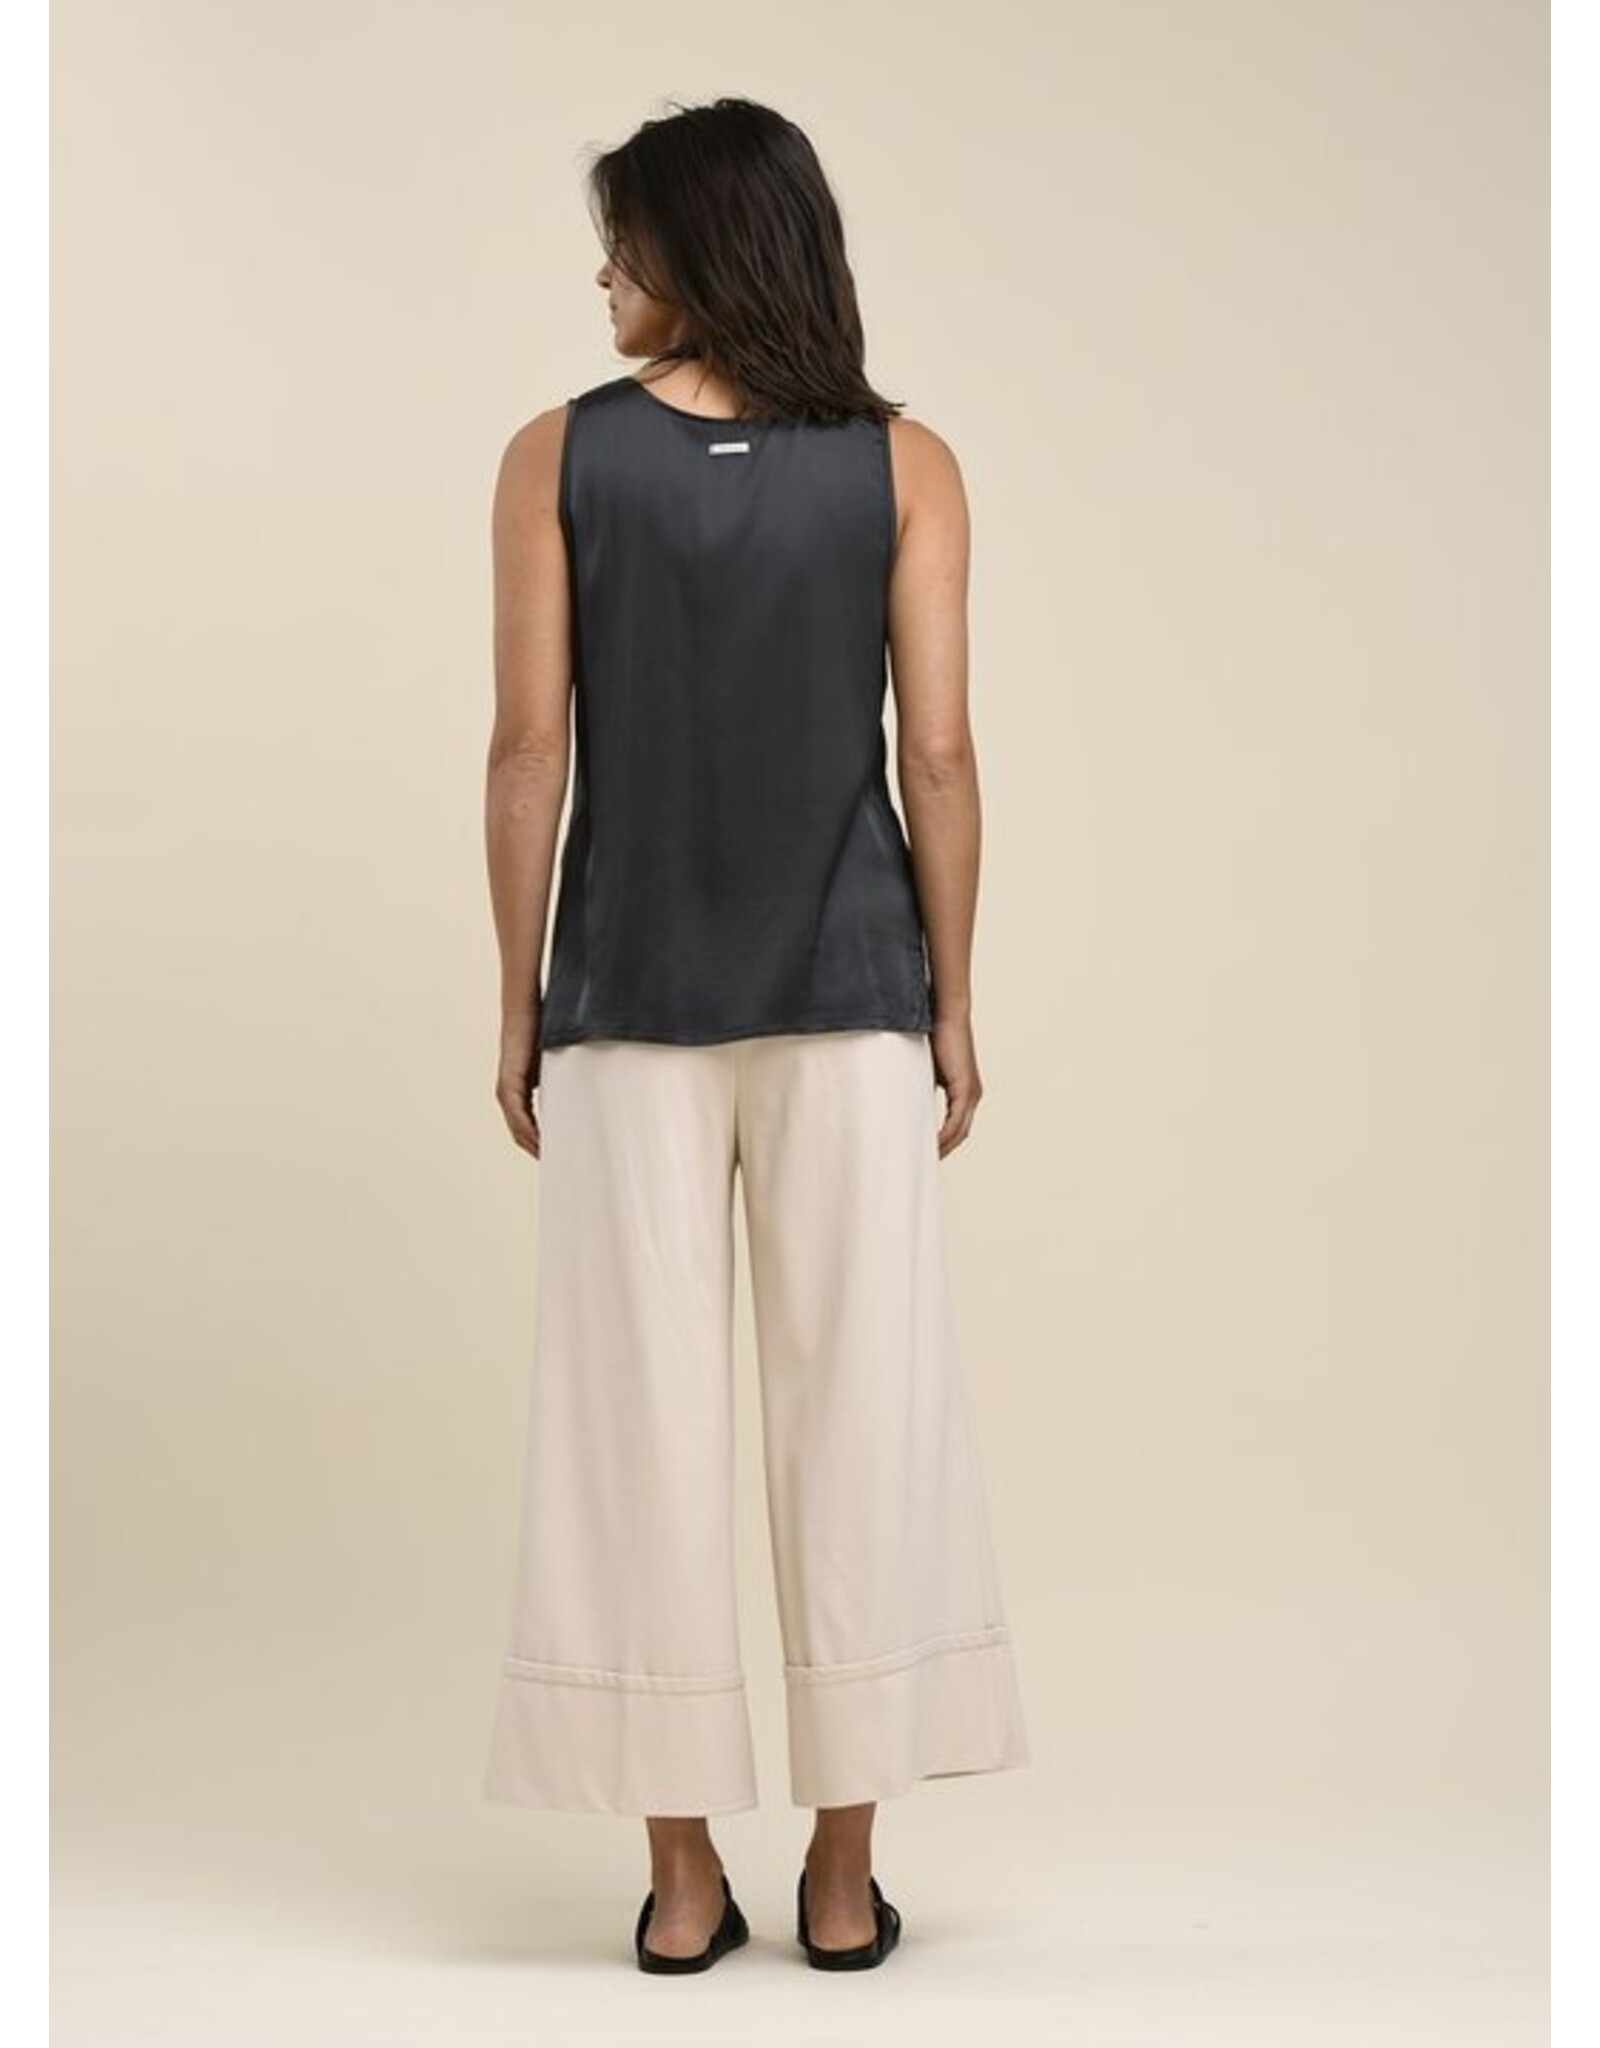 Humility Humility - TASSILO - Silk Touch Tank Top